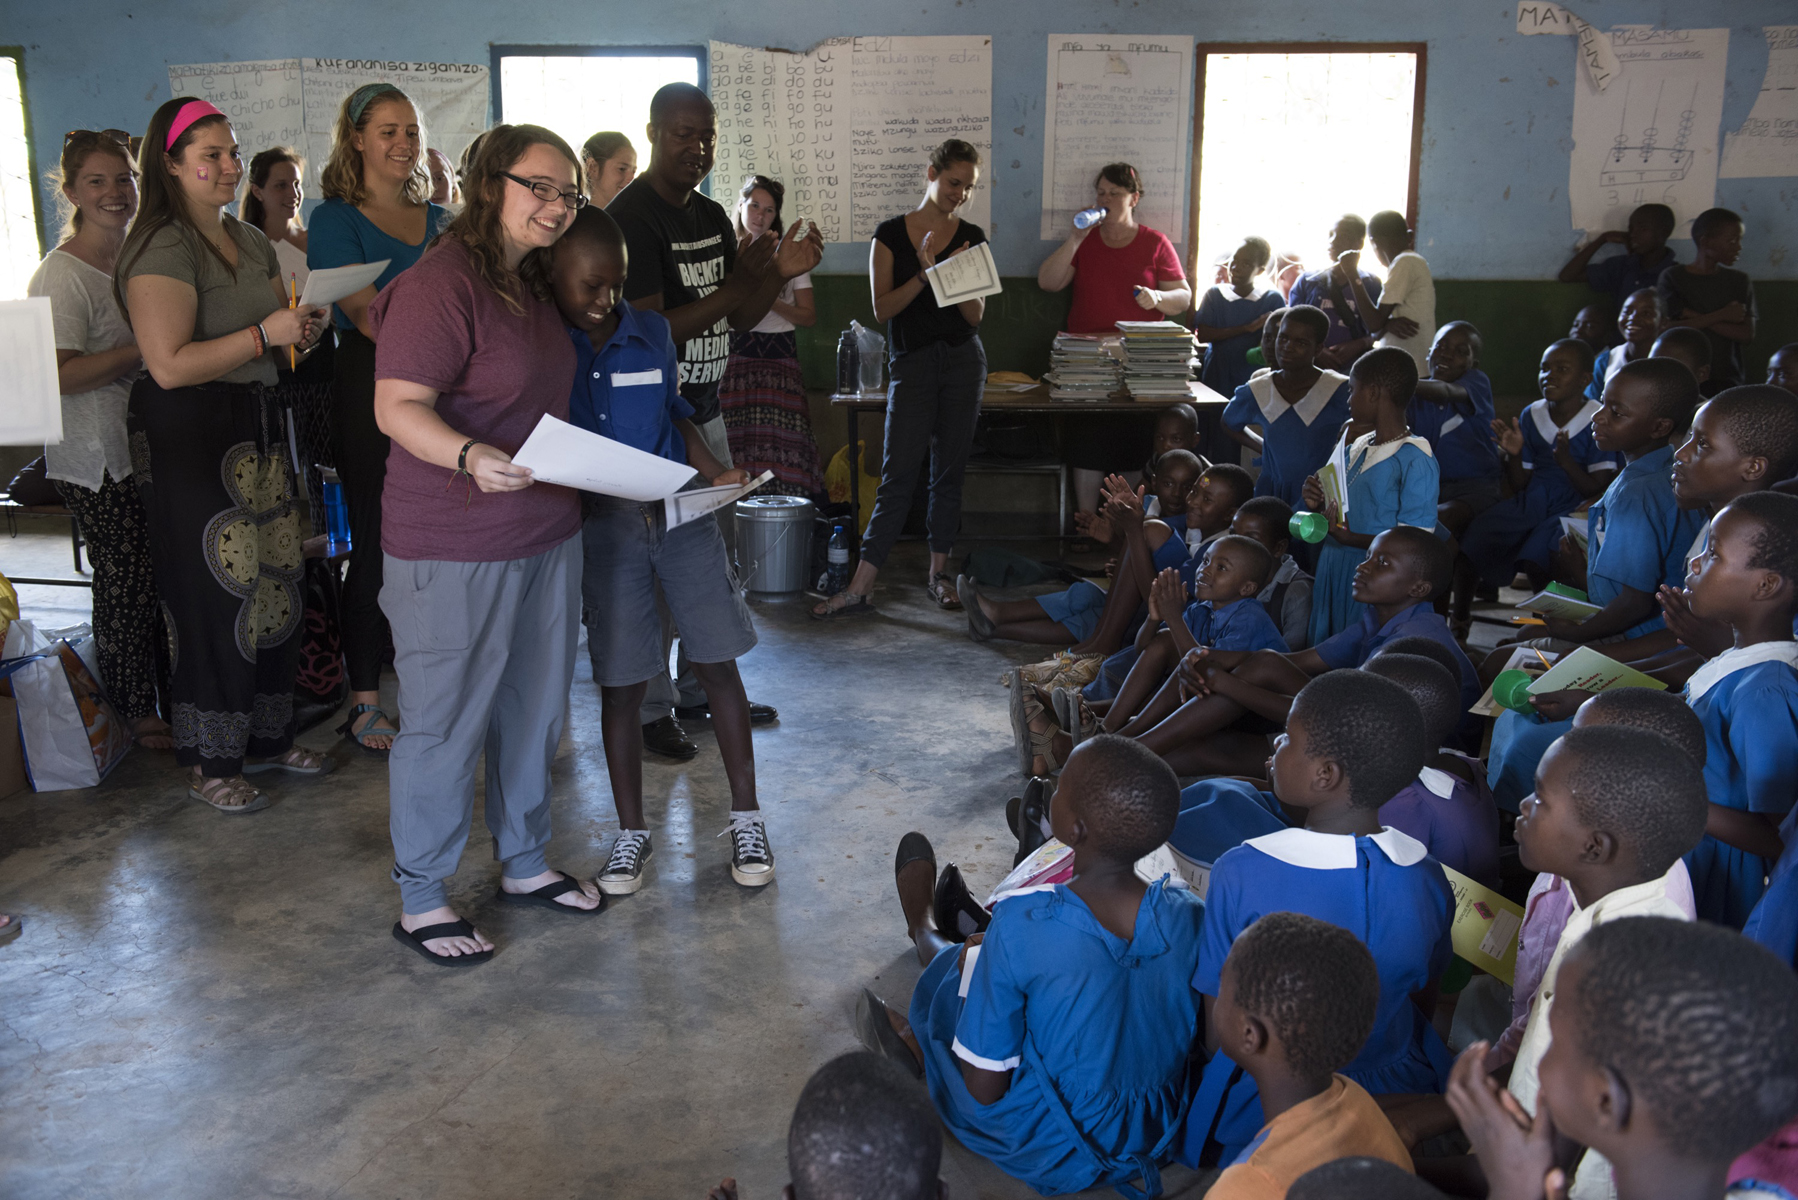 On their last day at the school, the Elon students present awards to each Malawian child.